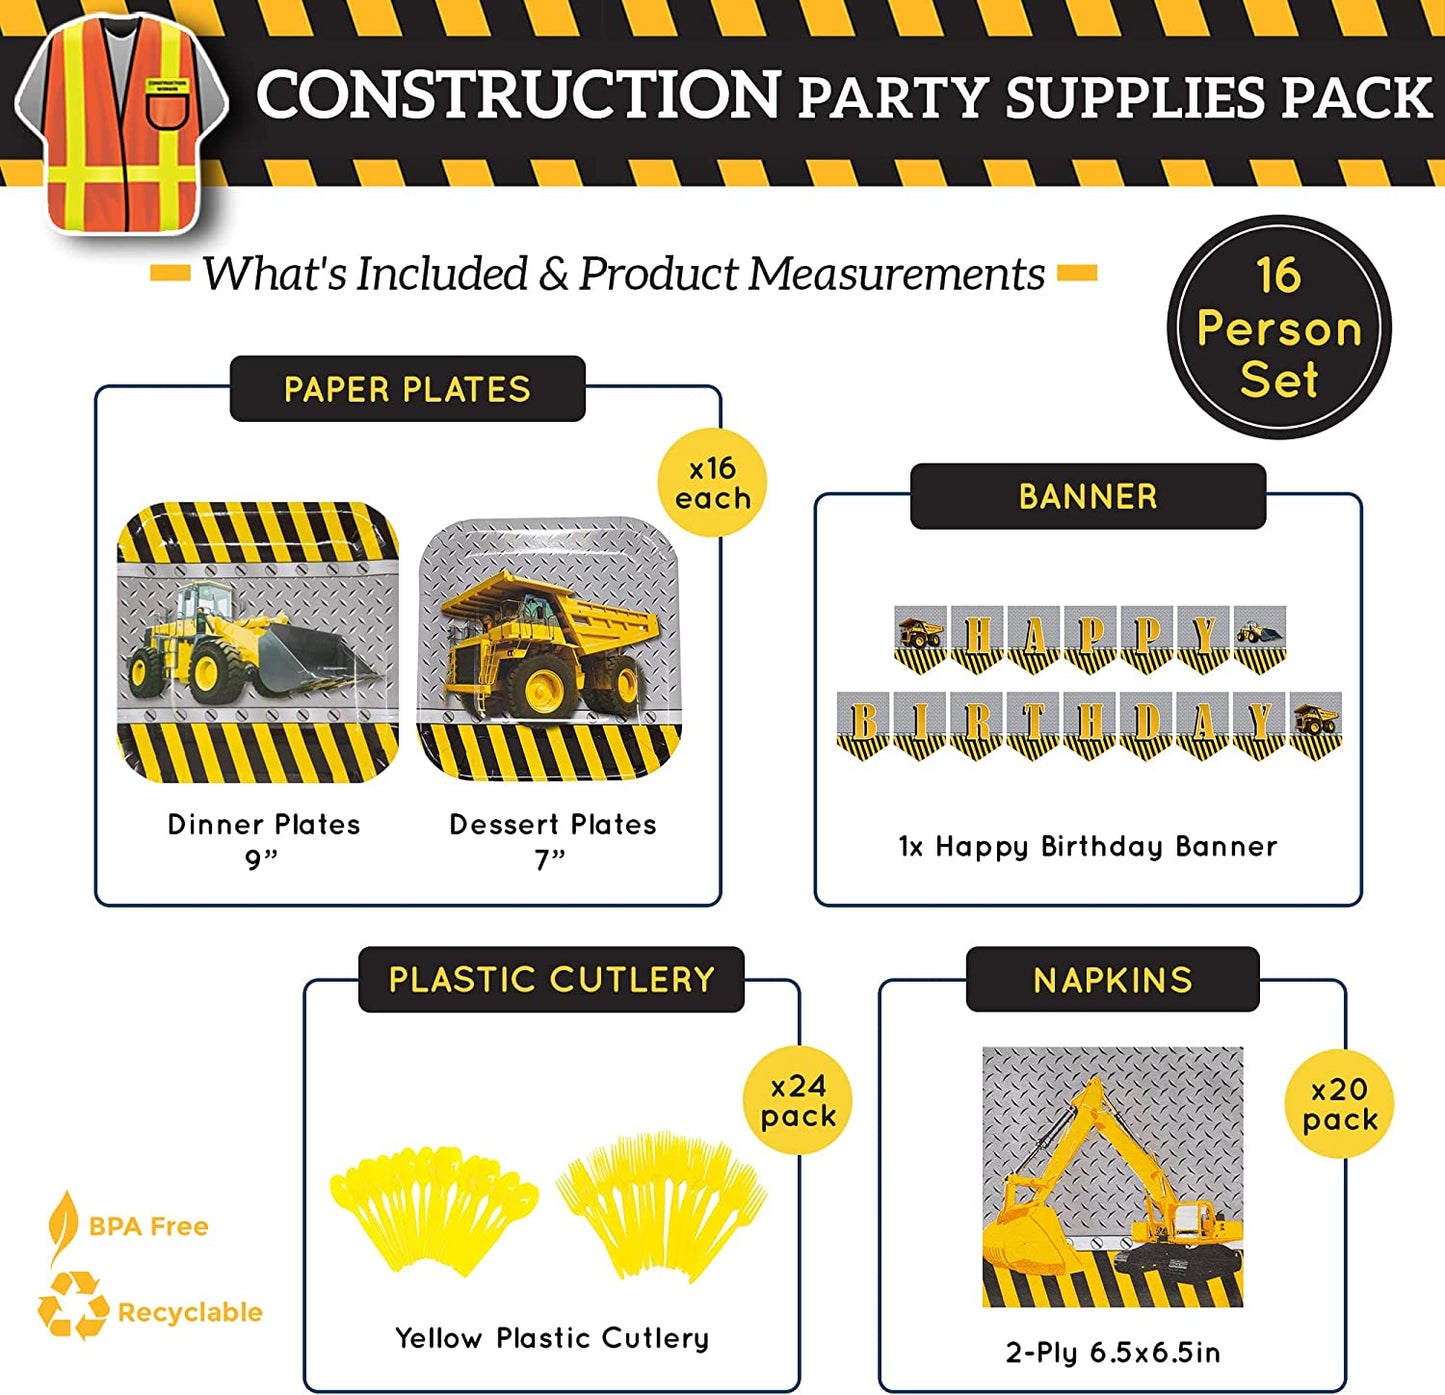 Construction Deluxe Party Supplies Pack | 16pcs 9-inch paper dinner plates | 16pcs 7-inch paper dessert plates | 20pcs paper lunch napkins | 2pcs table covers | 1pc Happy Birthday Banner | 24pcs Balloons | 24pcs yellow plastic forks | 24pcs yellow plastic spoons